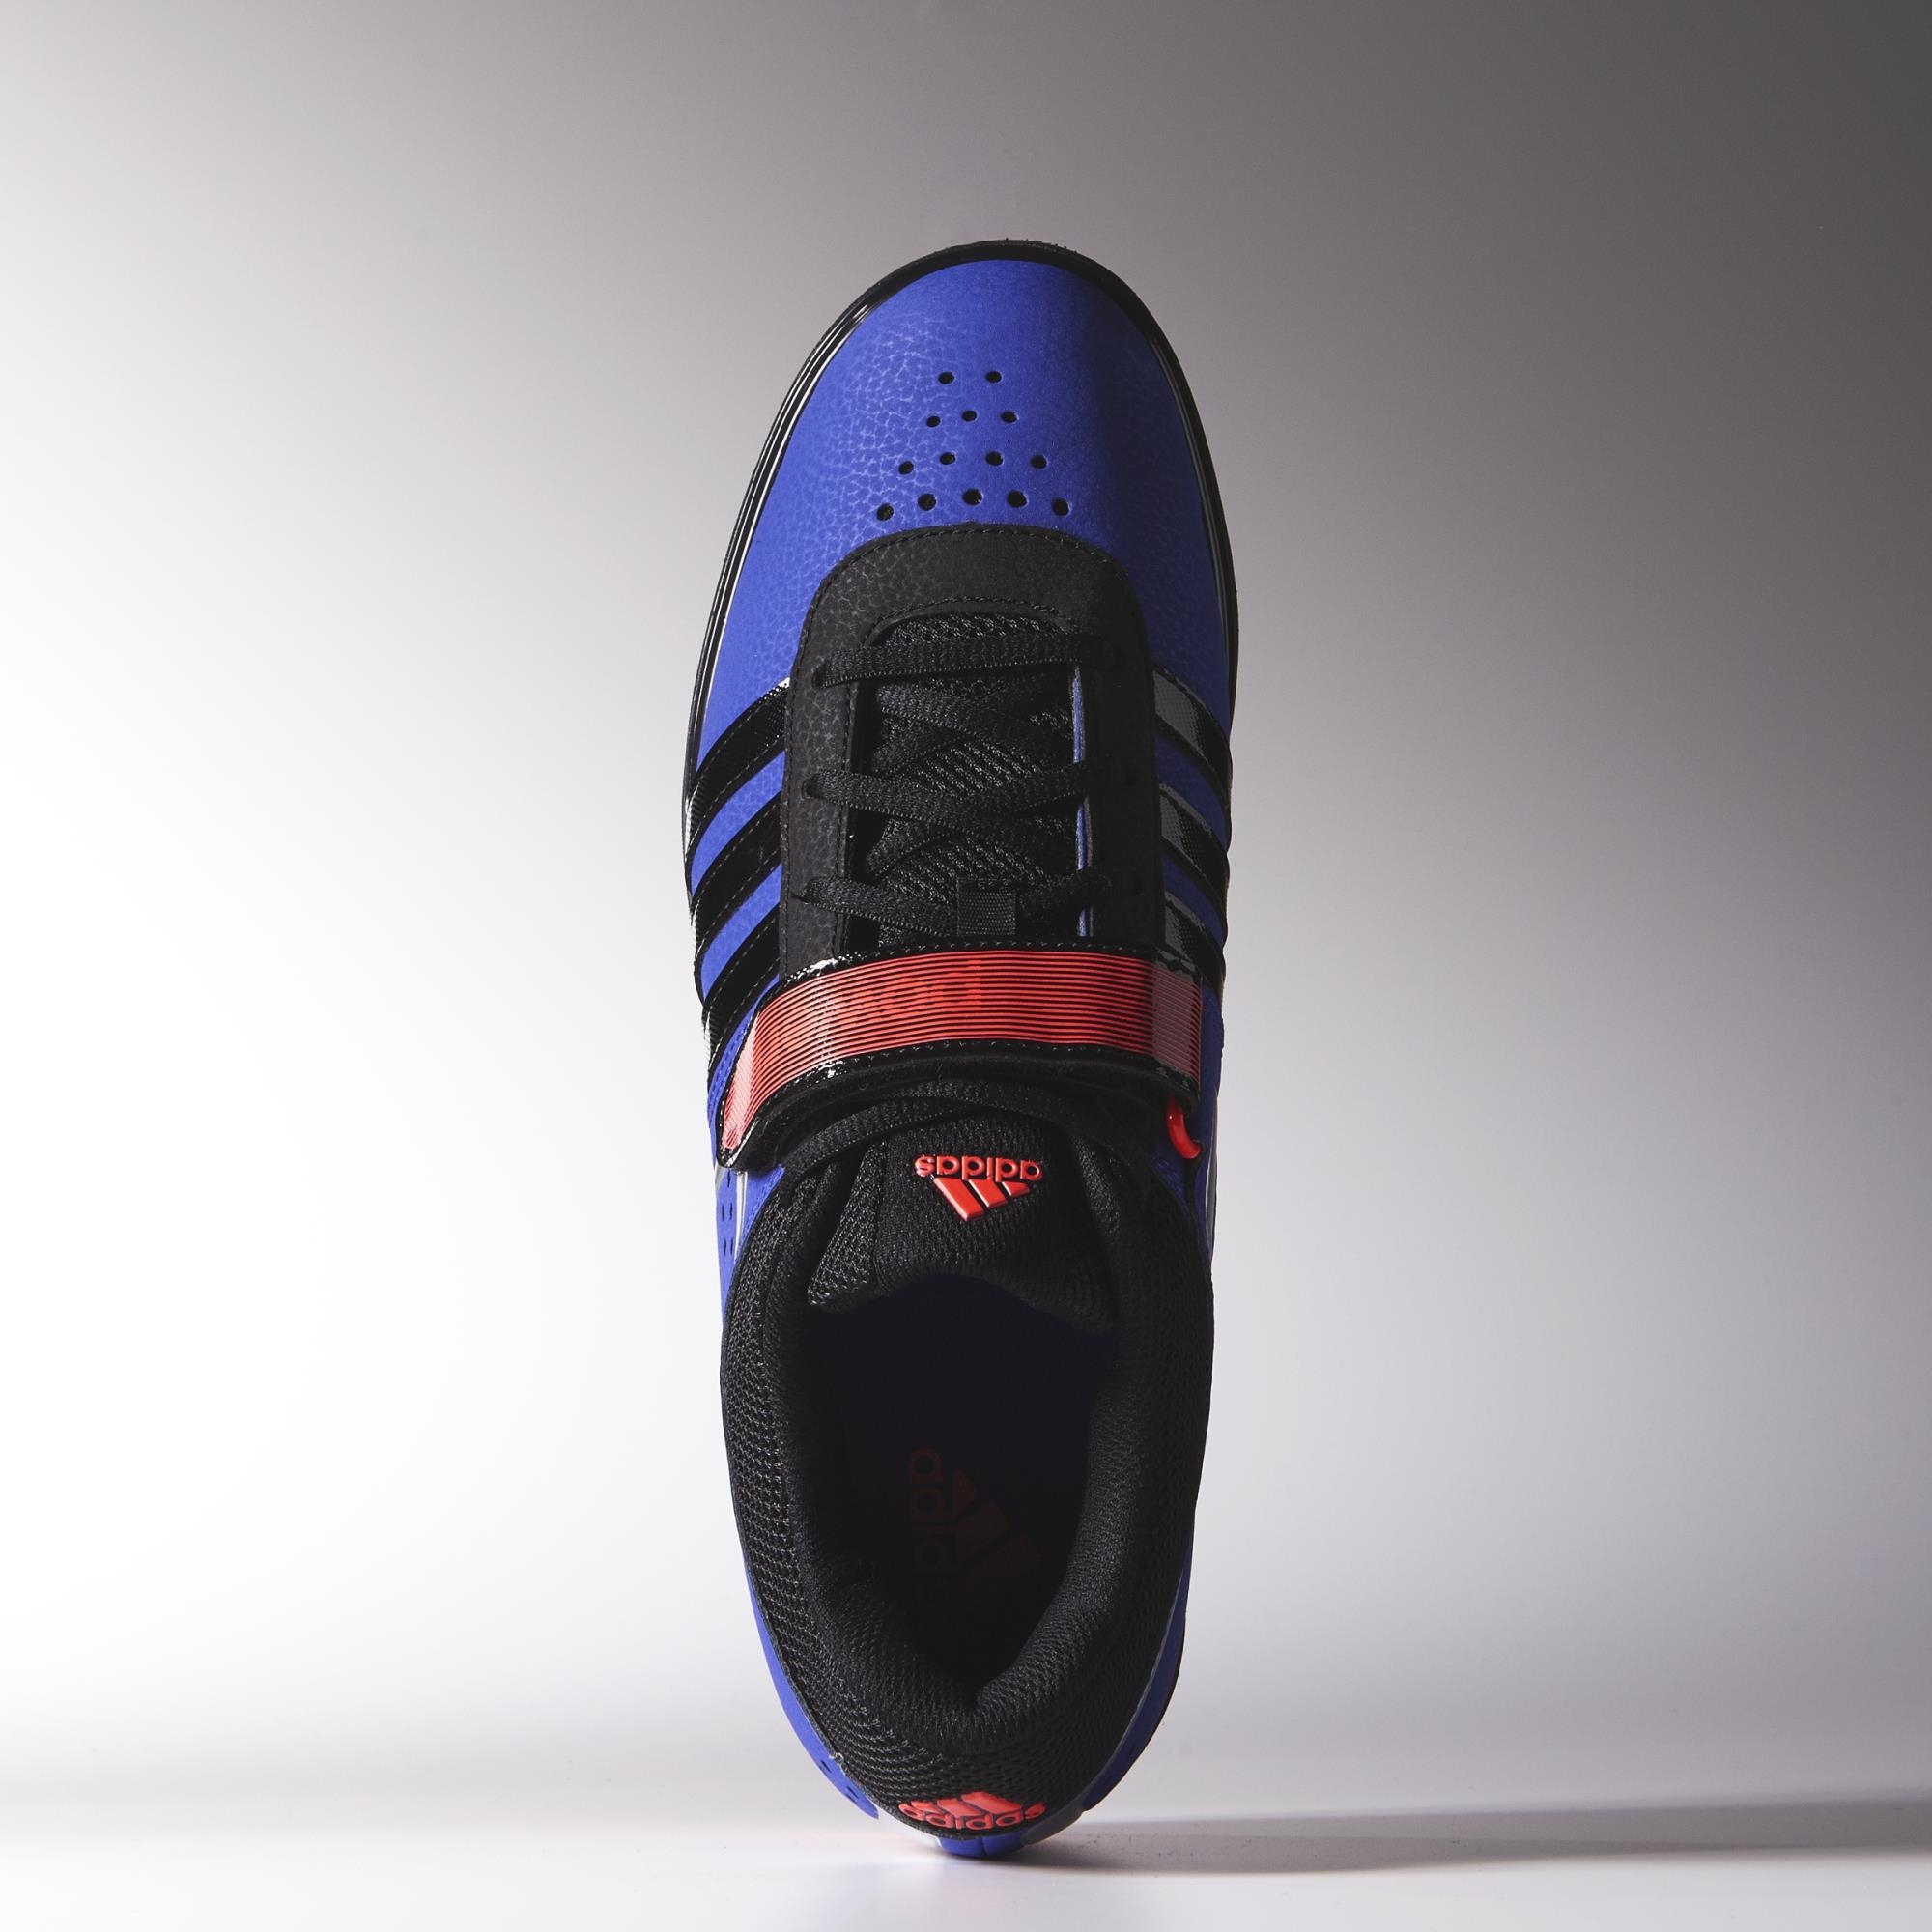 Adidas Powerlift 2.0 - Blue - Weightlifting Shoes - up